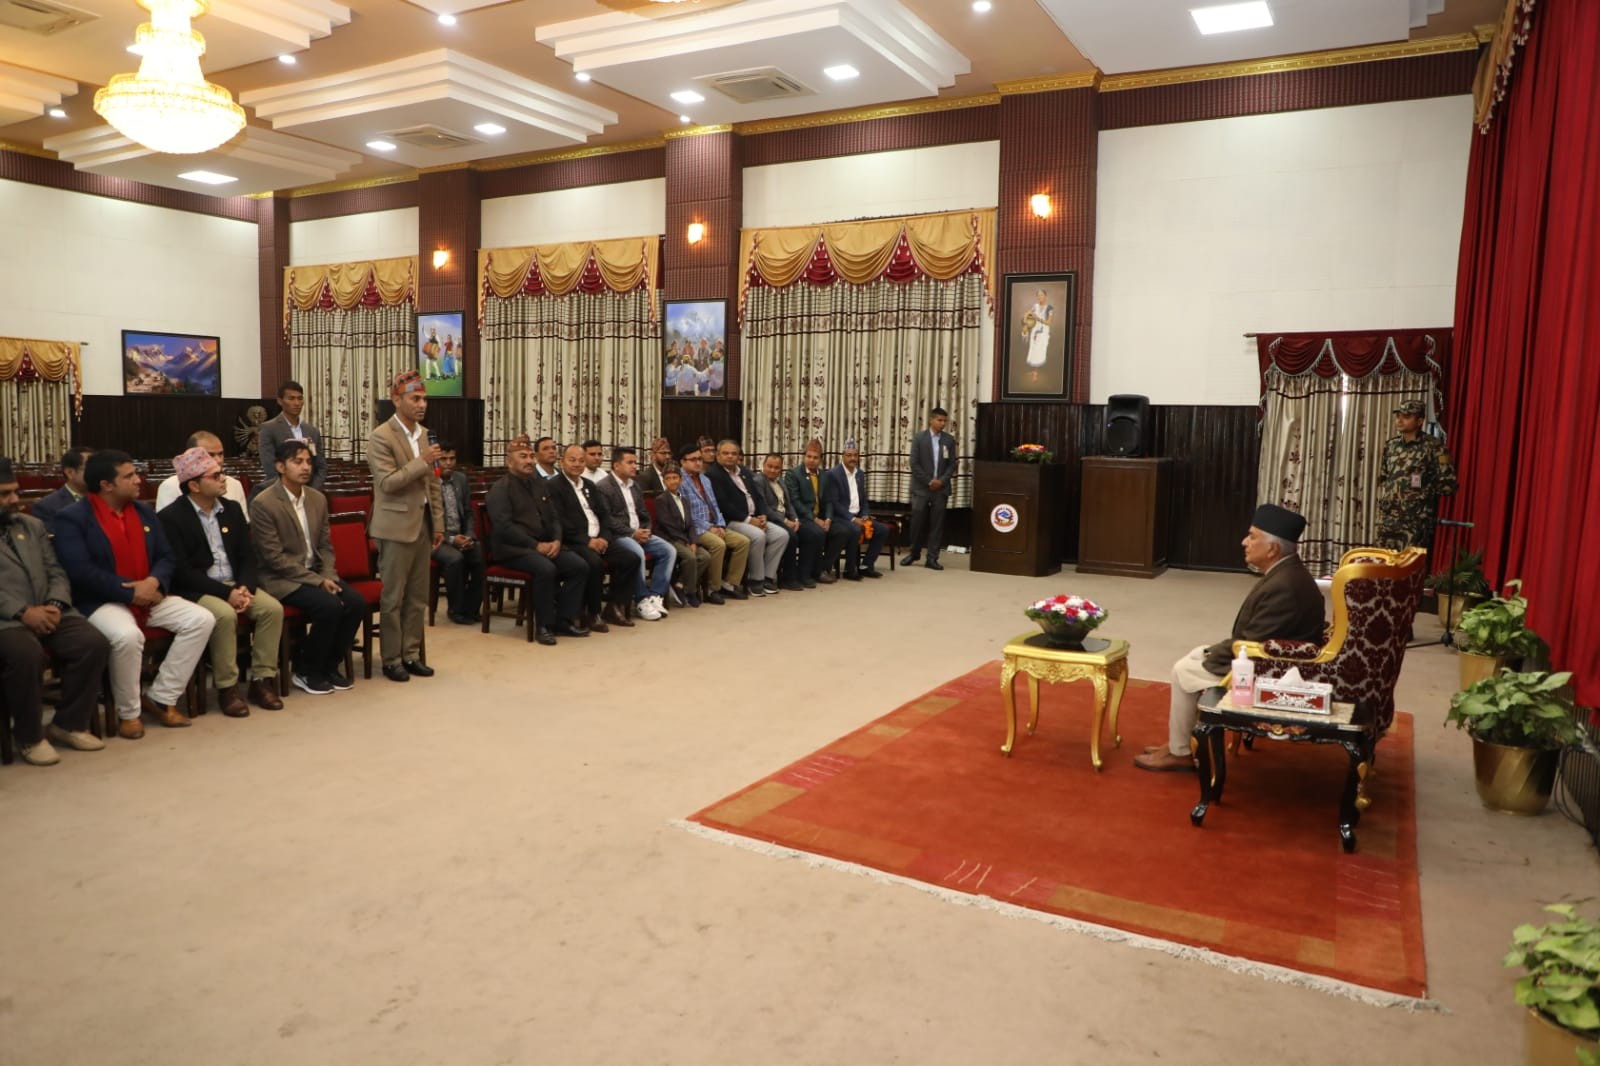 Meeting and Discussion with the Honorable President of Nepal, Mr. Ramchandra Paudel